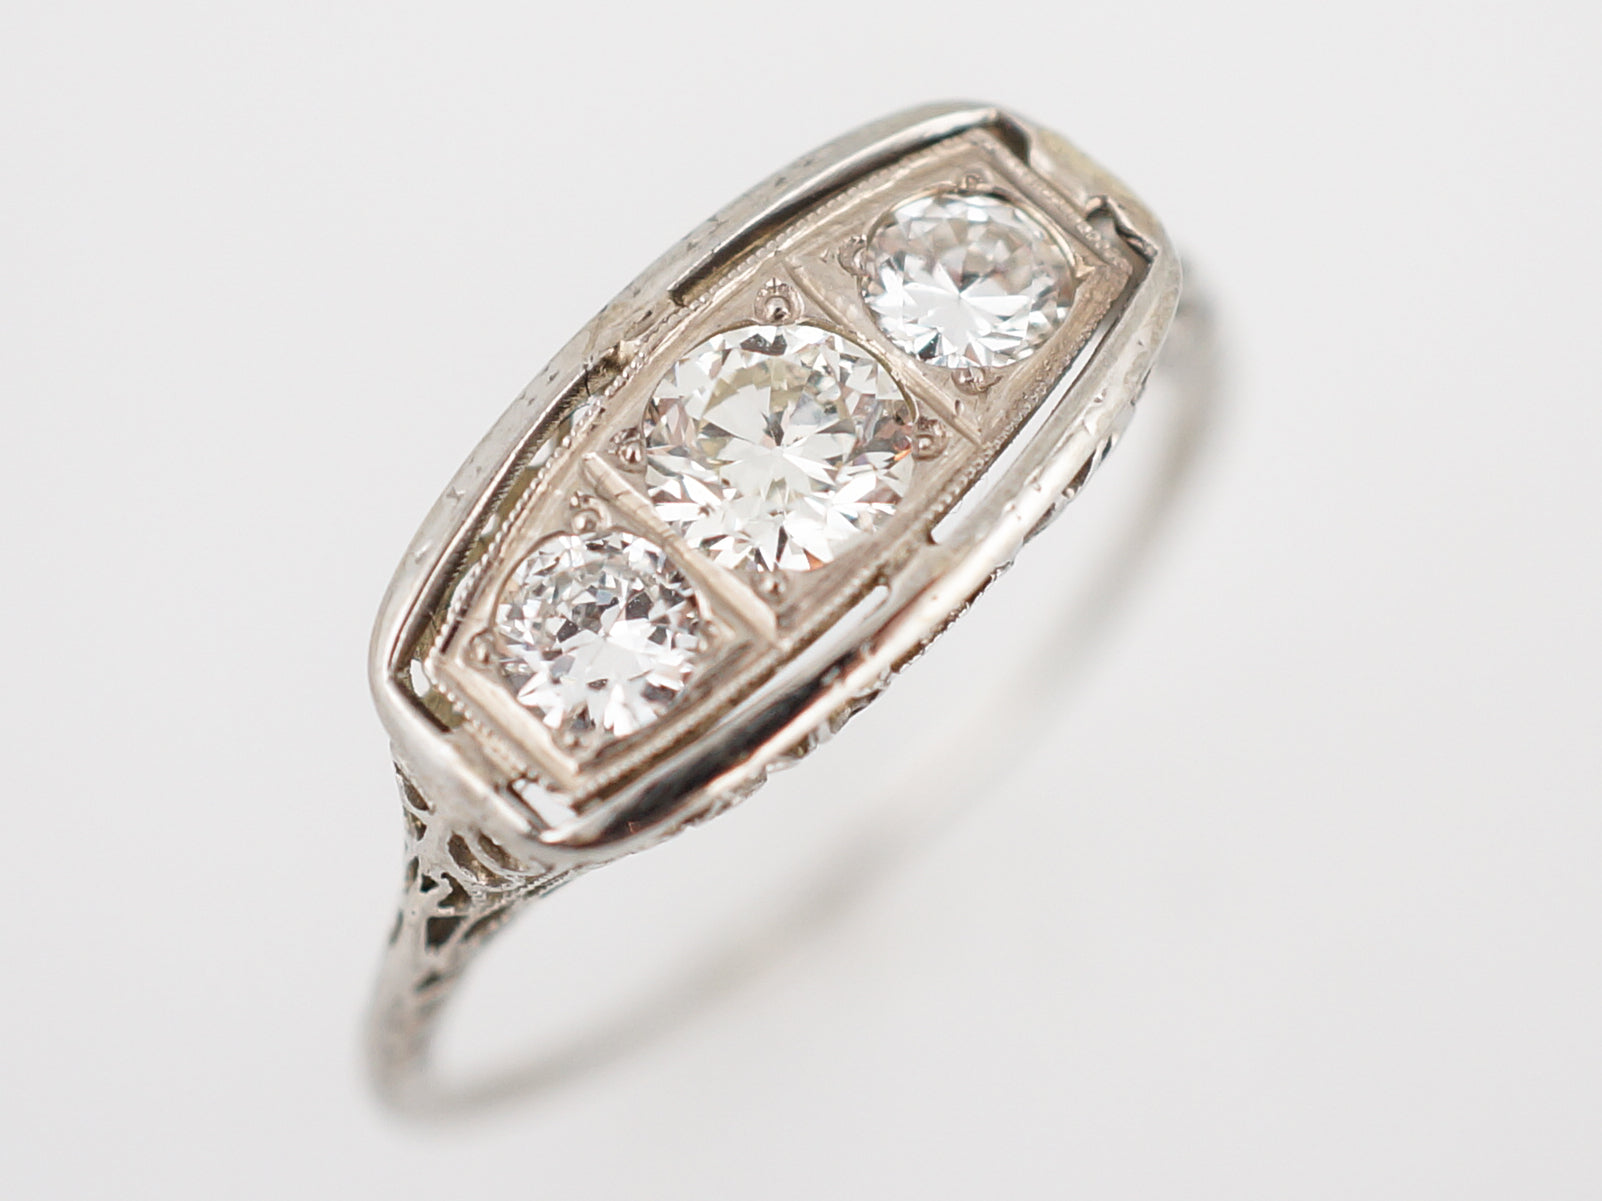 Antique Engagement Ring Art Deco .64 Old European Cut Diamond in 18k White GoldComposition: Platinum Total Diamond Weight: .64 cttwct Total Gram Weight: 1.70 g